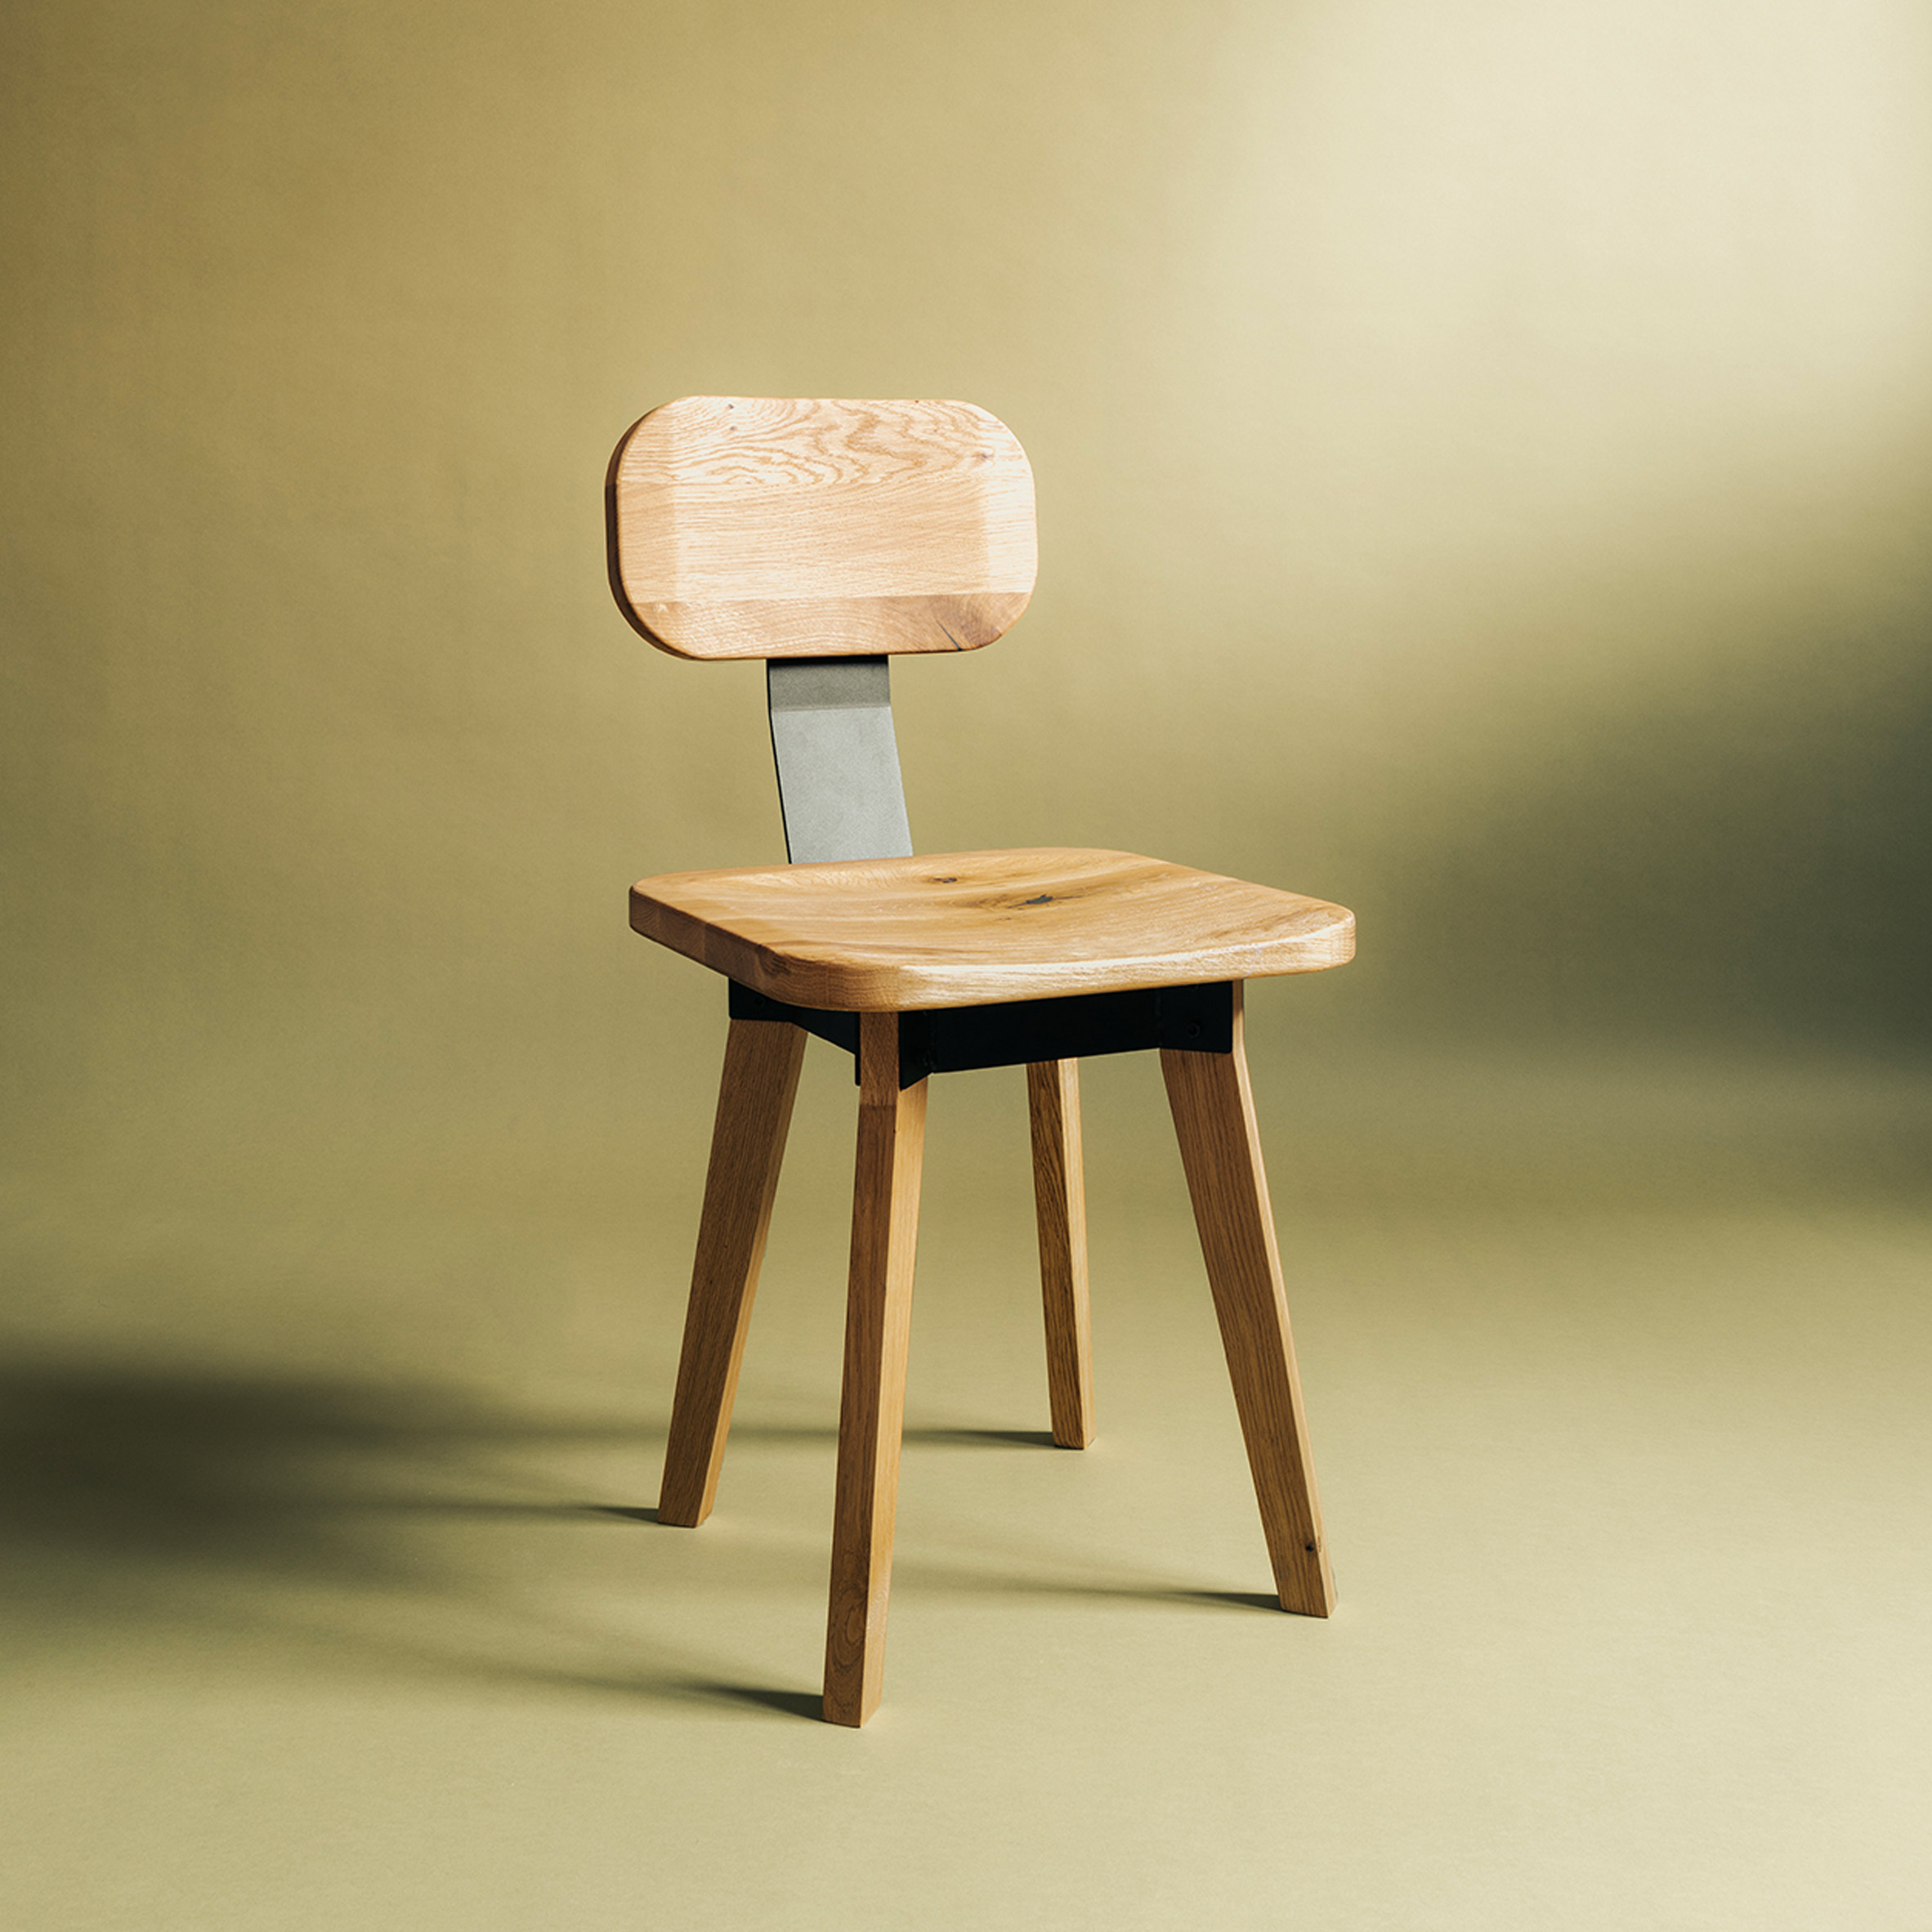 Image of a wooden chair